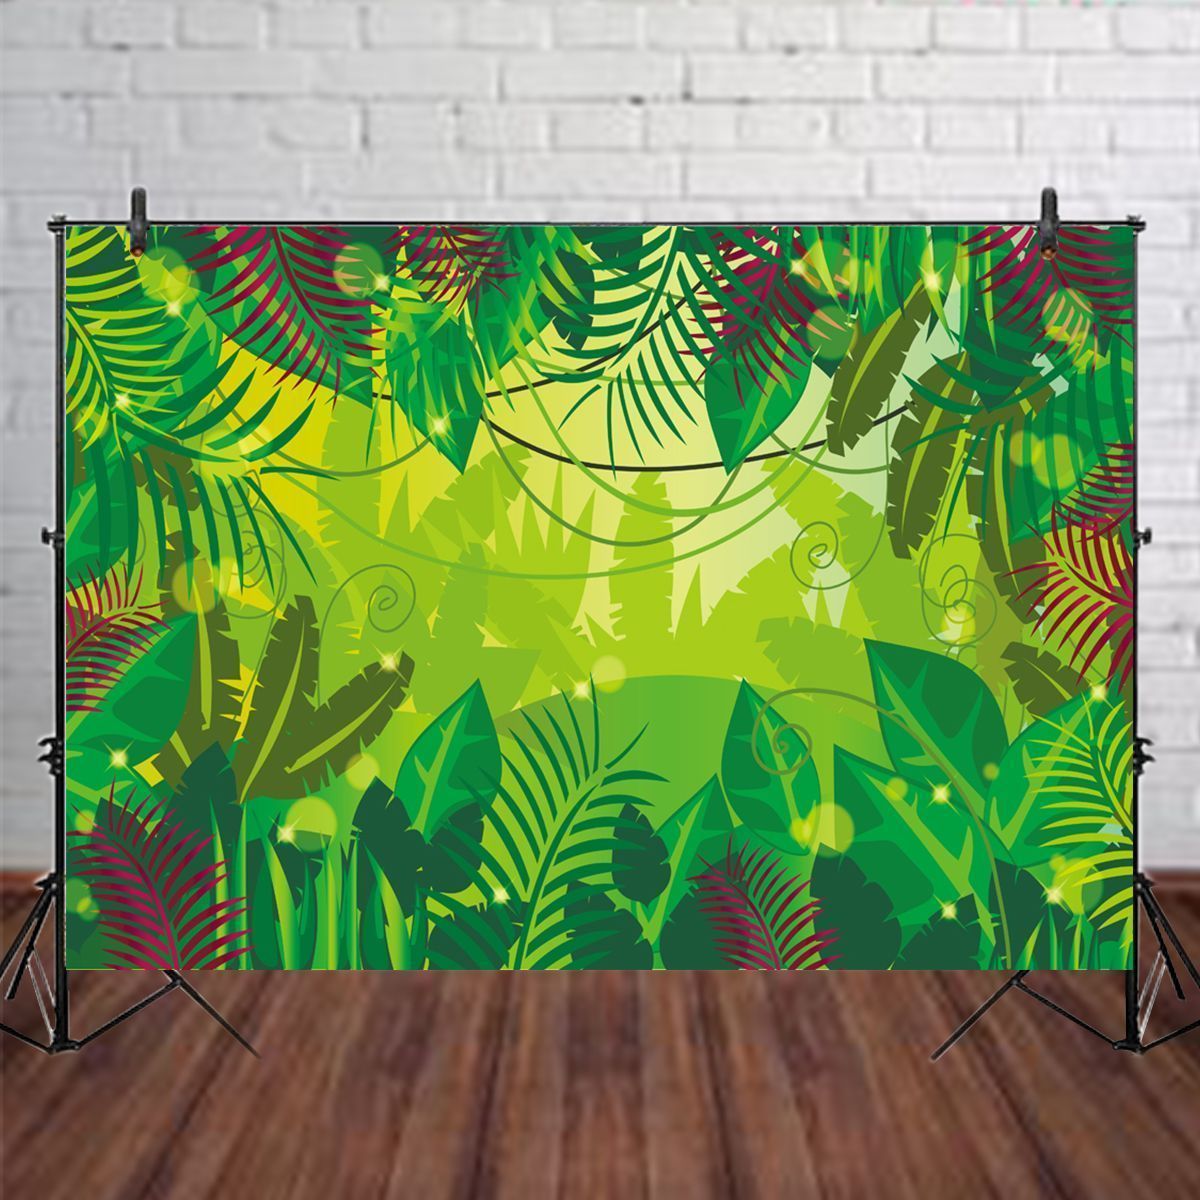 5x3FT-7x5FT-9x6FT-Green-Tropical-Rain-Forest-Photography-Backdrop-Background-Studio-Prop-1618192